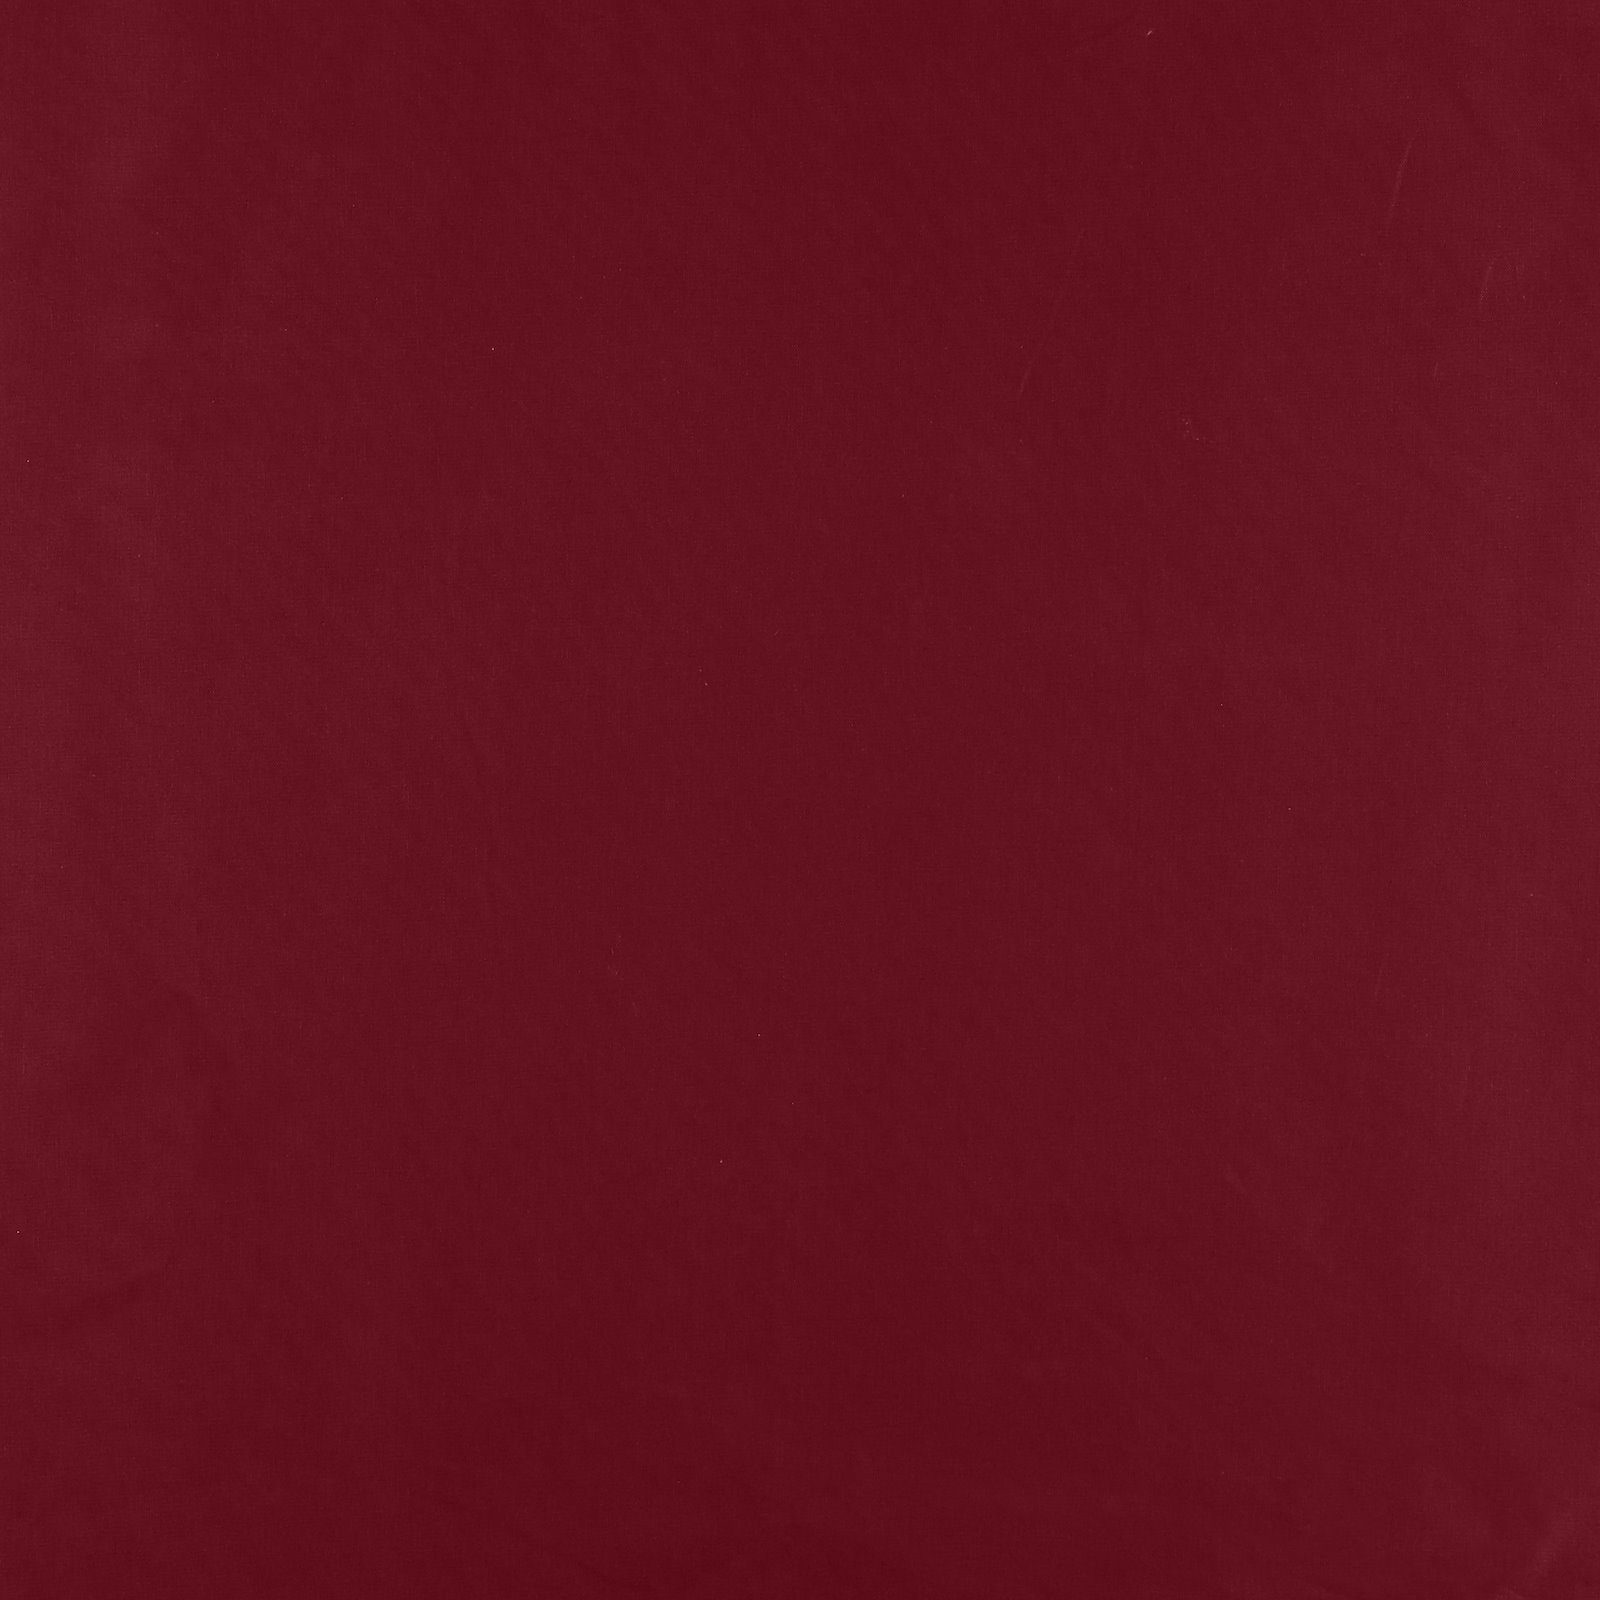 Linen/cotton classic red 410143_pack_solid